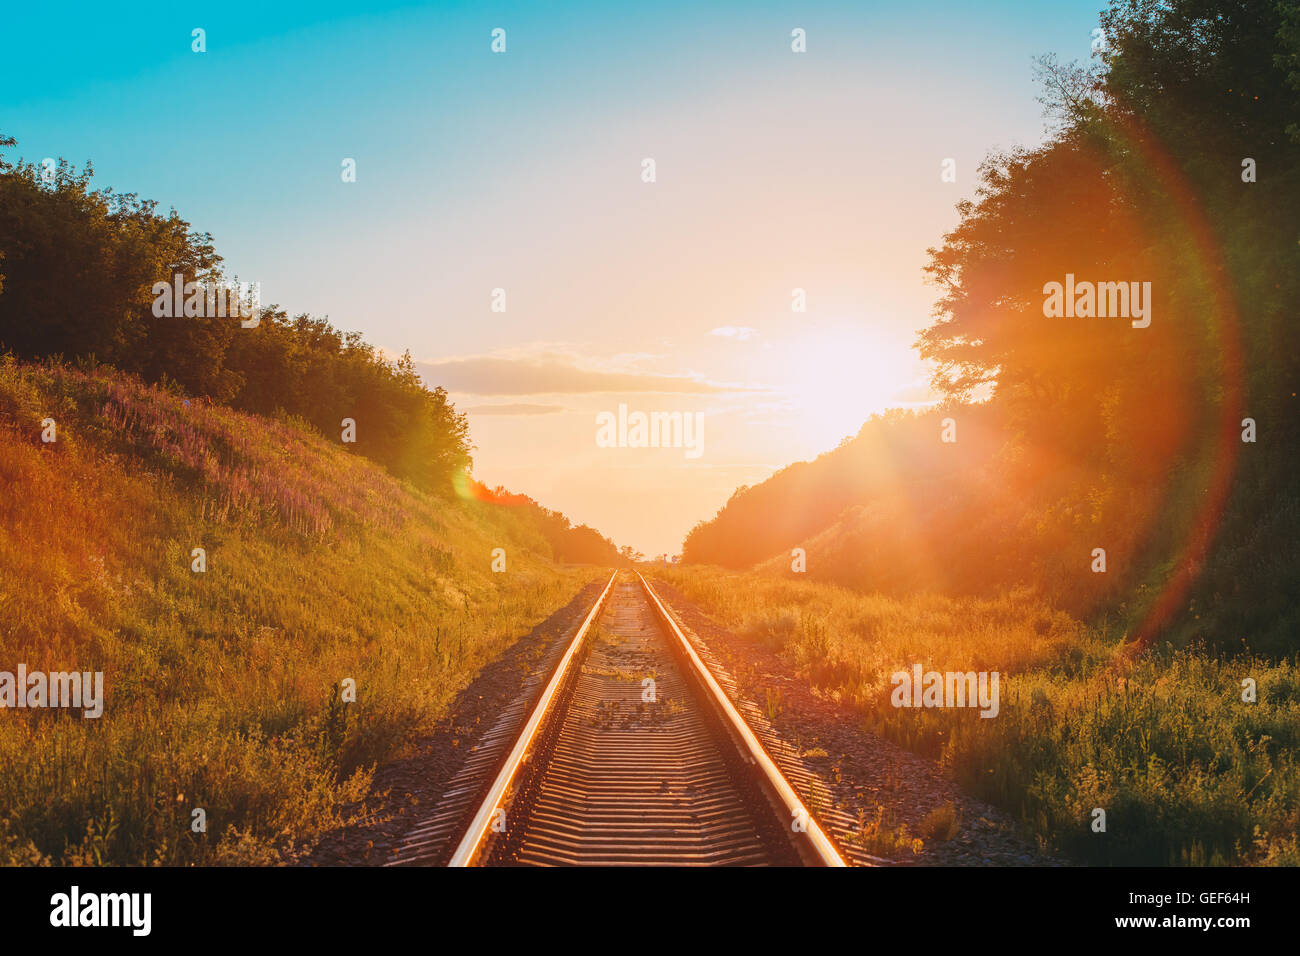 The Scenic Landscape With Railway Going Straight Ahead Through Summer Hilly Meadow To Sunset Or Sunrise In Sunlight. Lense Flare Stock Photo